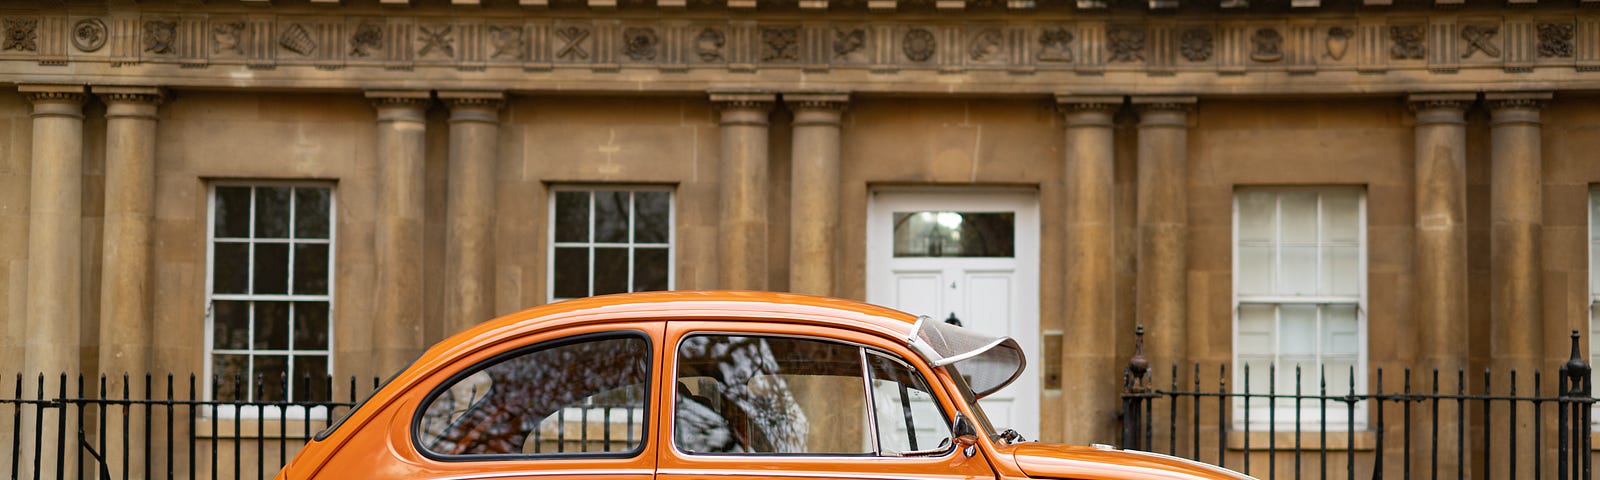 An orange Beatle car parks in from of a building.